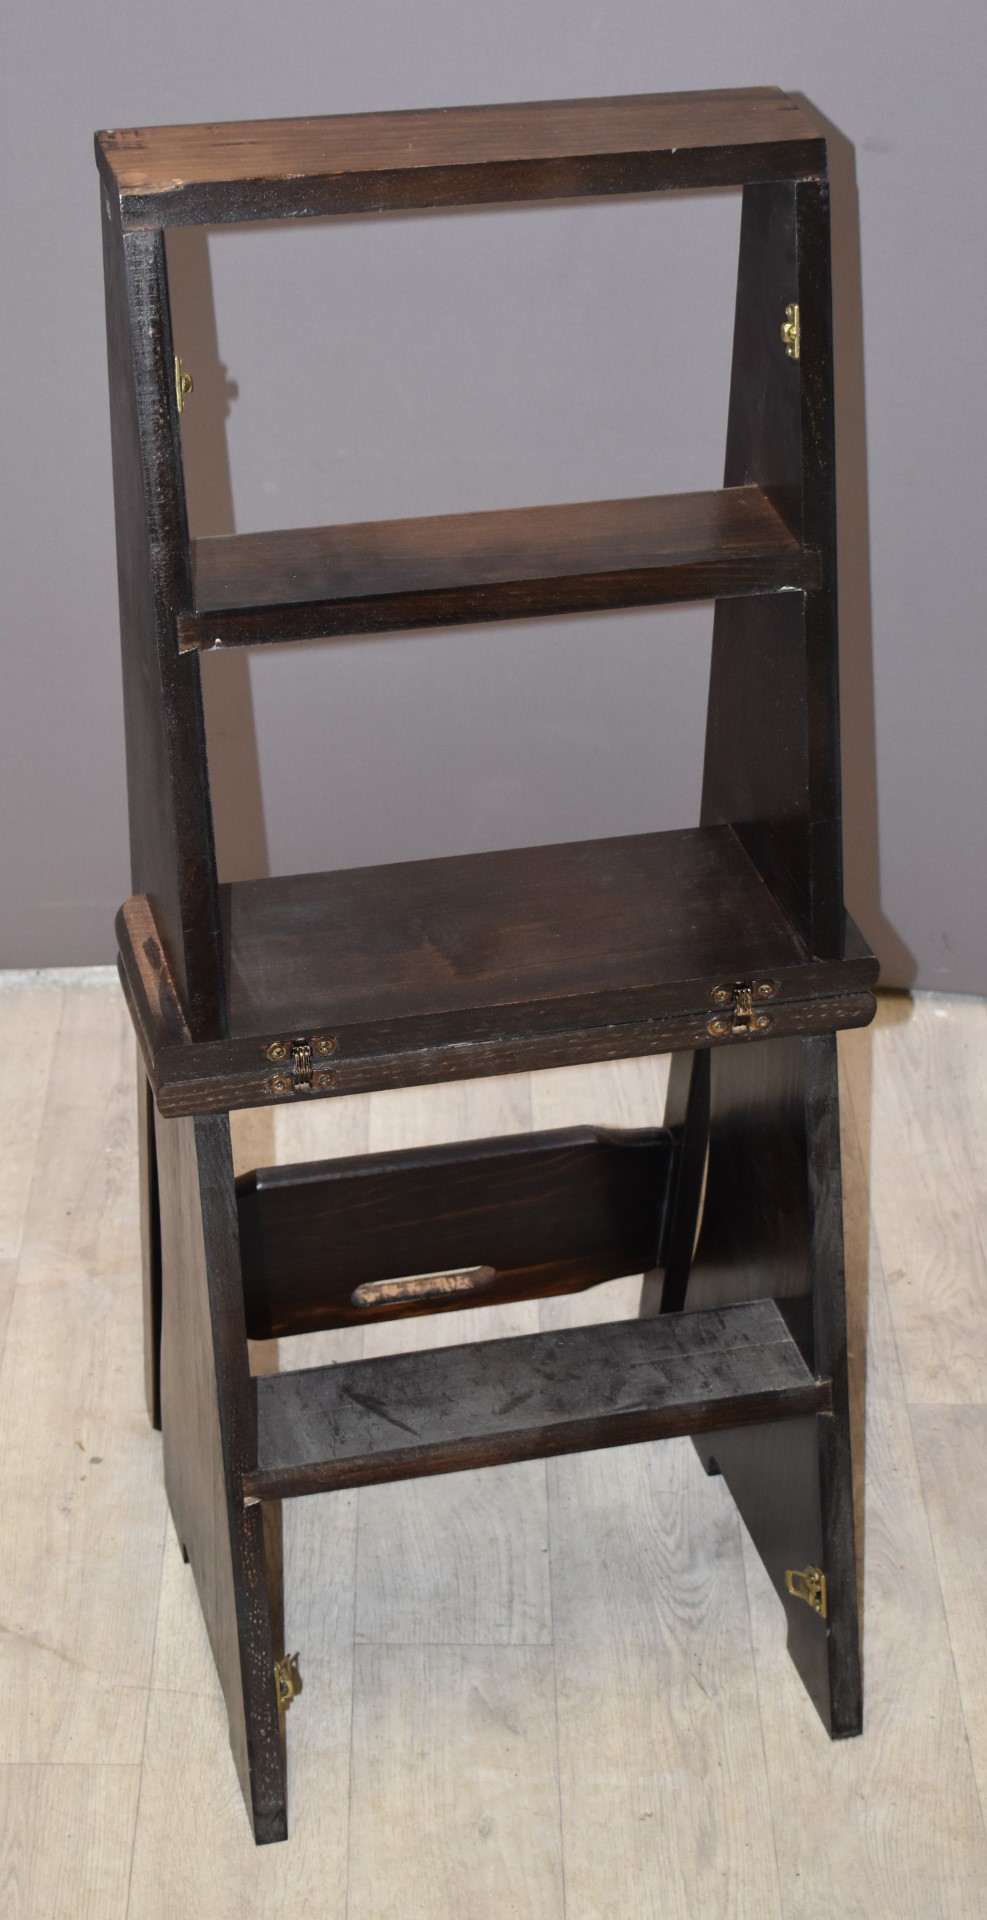 Stained wood metamorphic library steps or chair, height of top step 92cm - Image 3 of 3